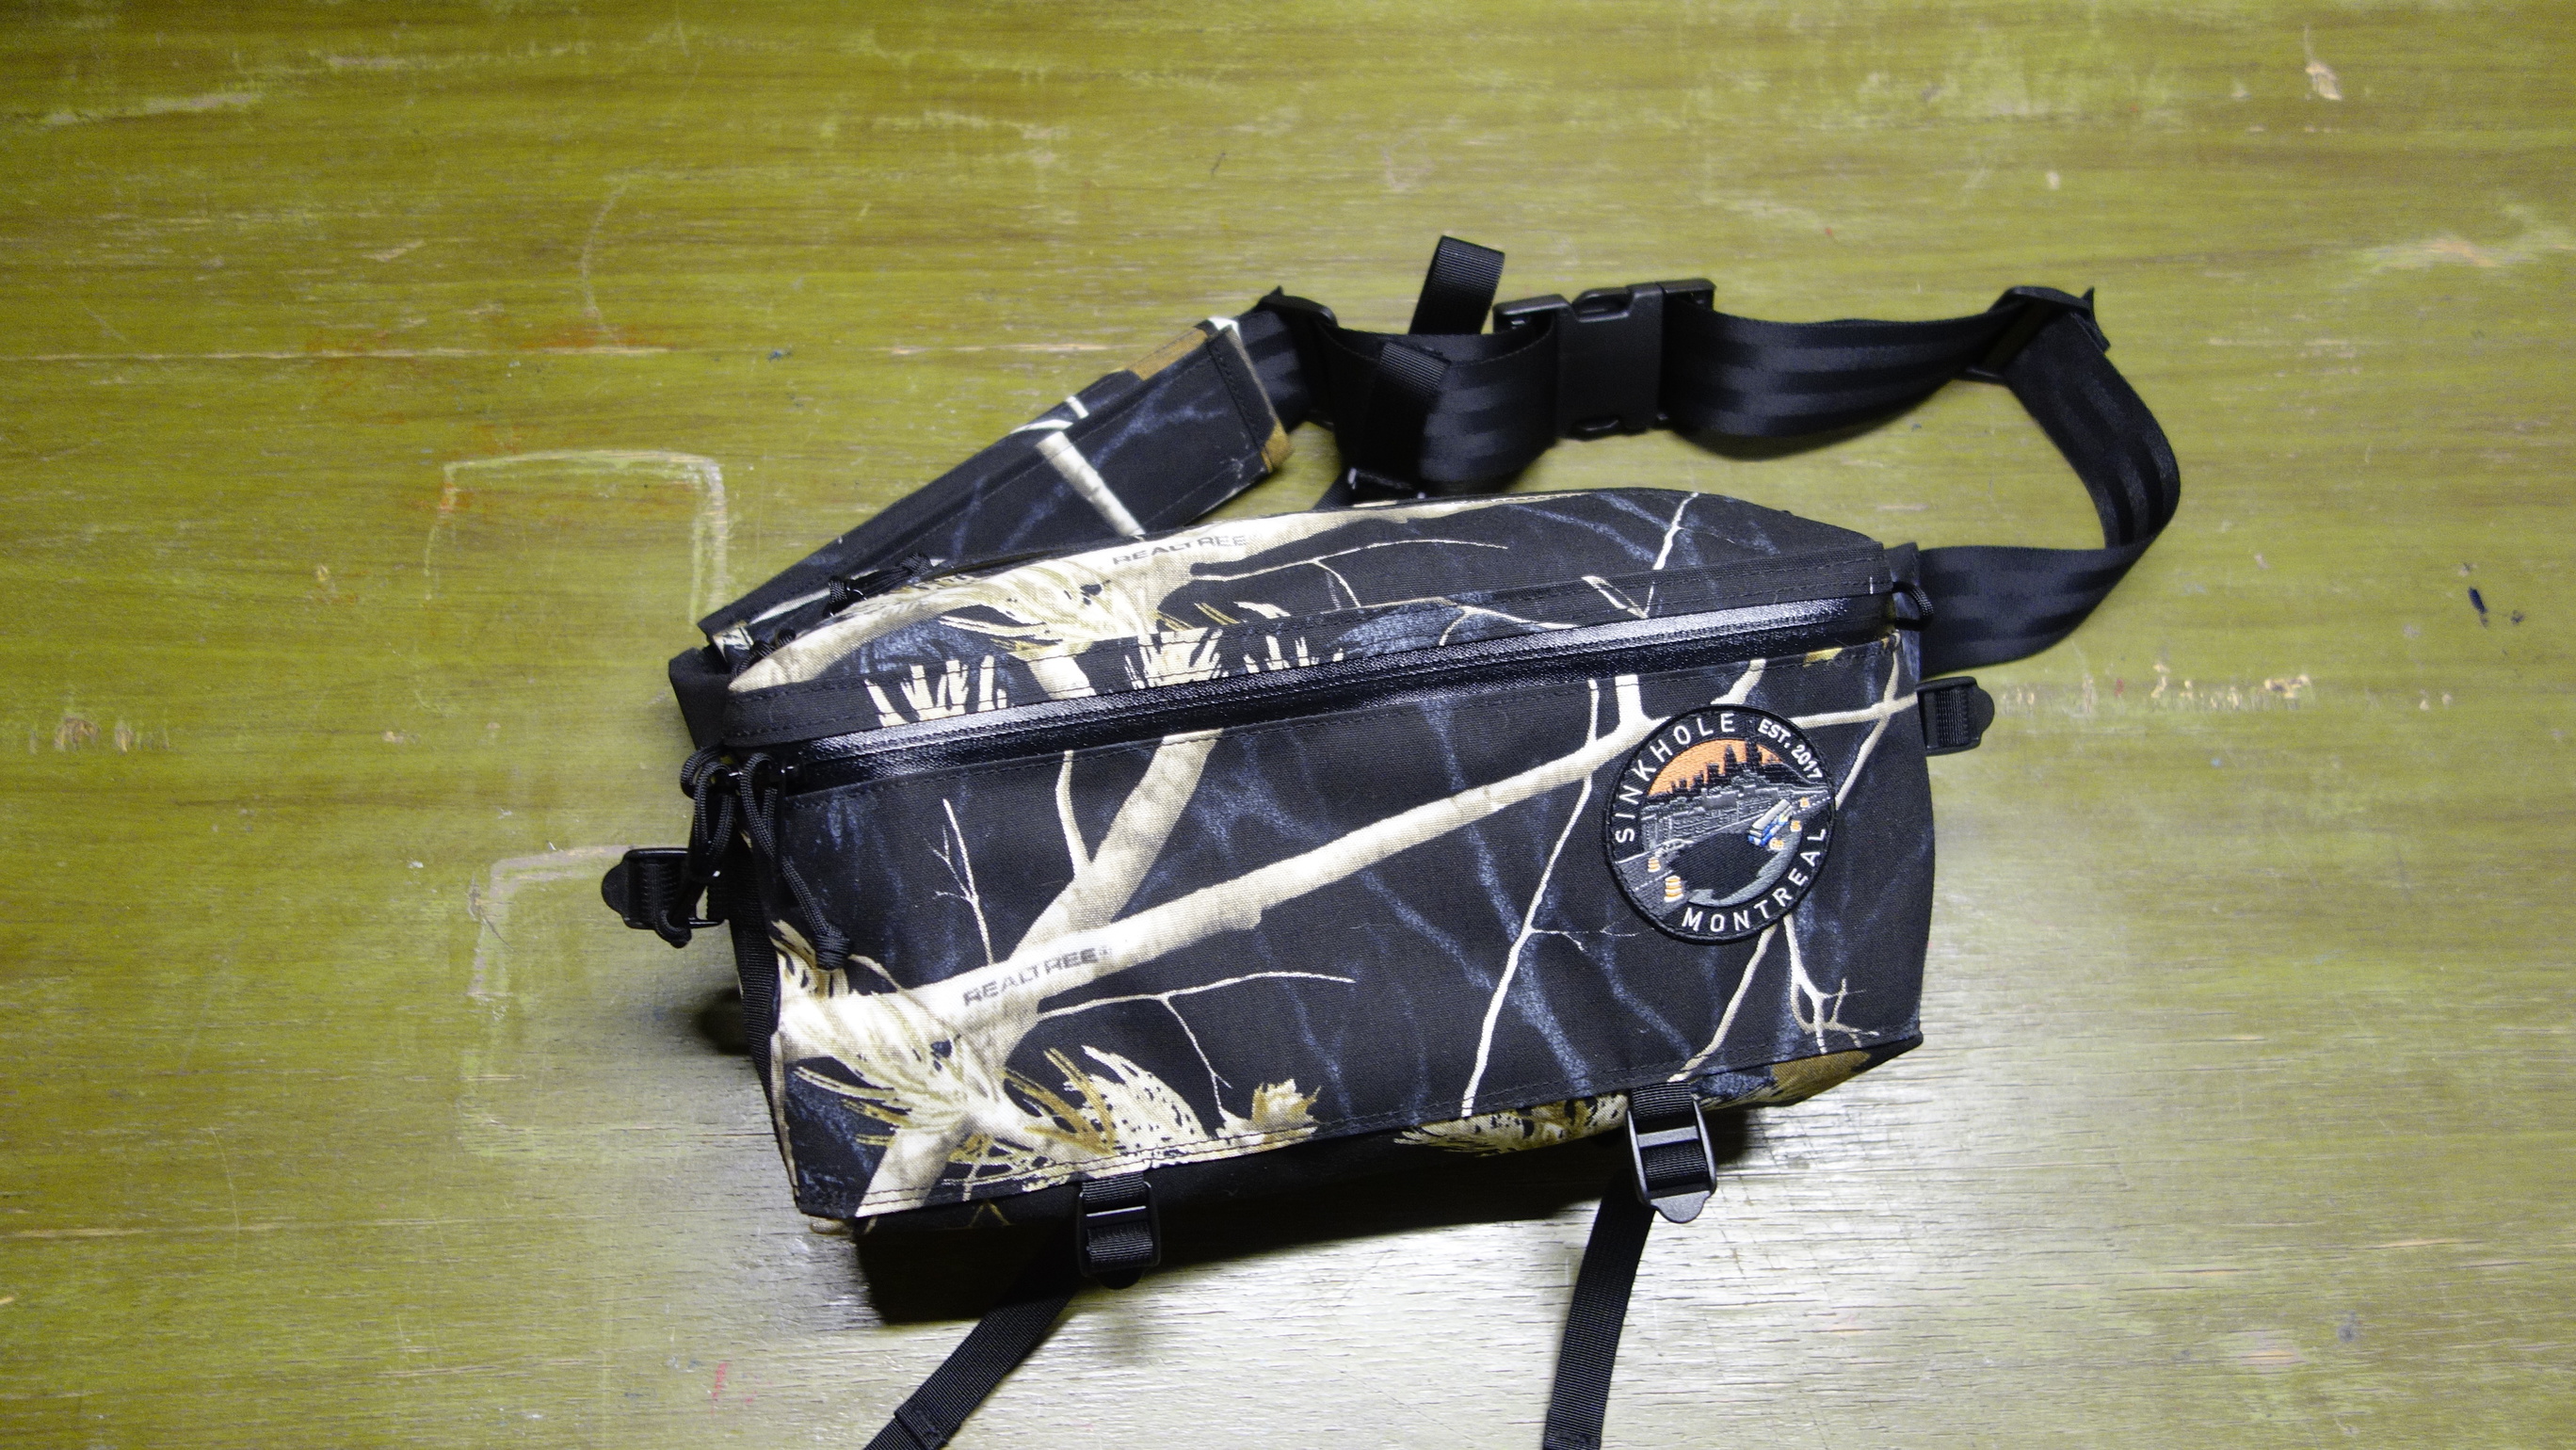 XL fannypack with a black realtree camo pattern